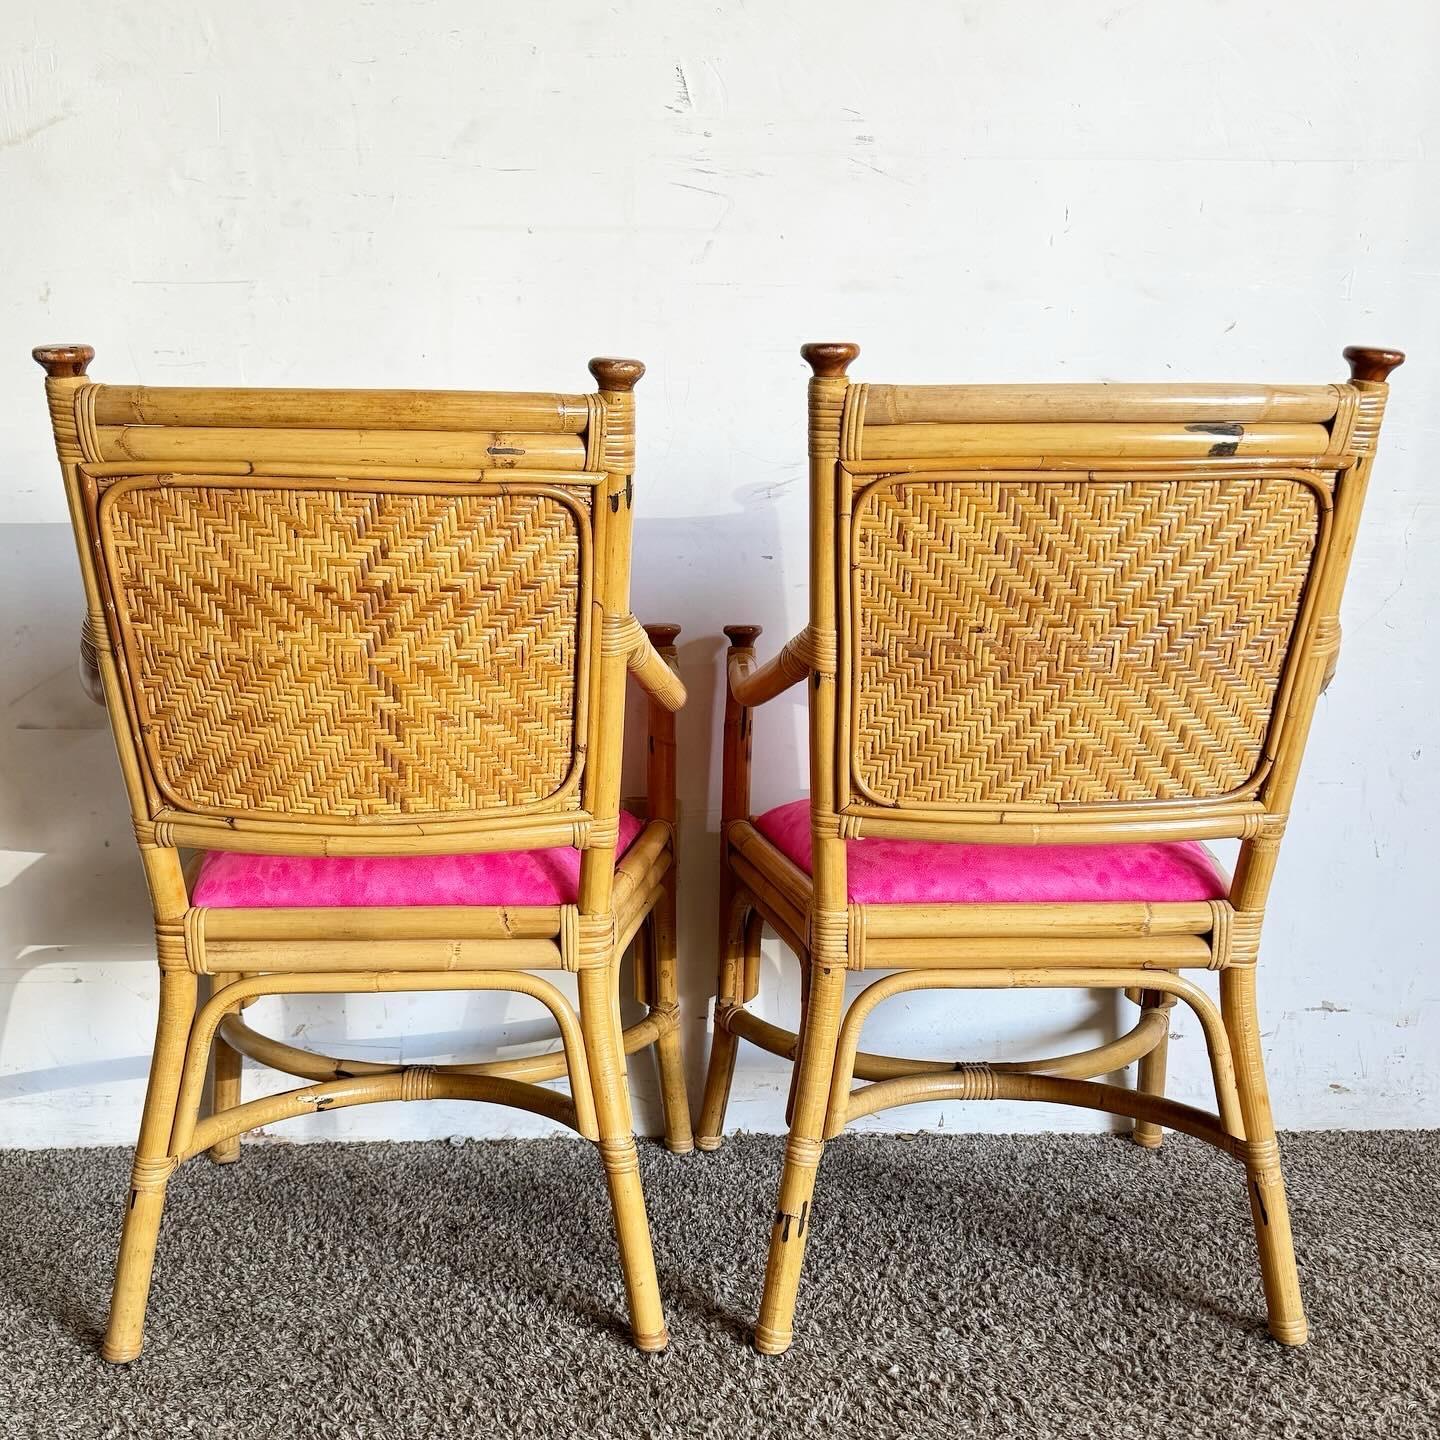 Boho Chic Wicker Rattan Bamboo Dining Arm Chairs With Hot Pink Cushions For Sale 1